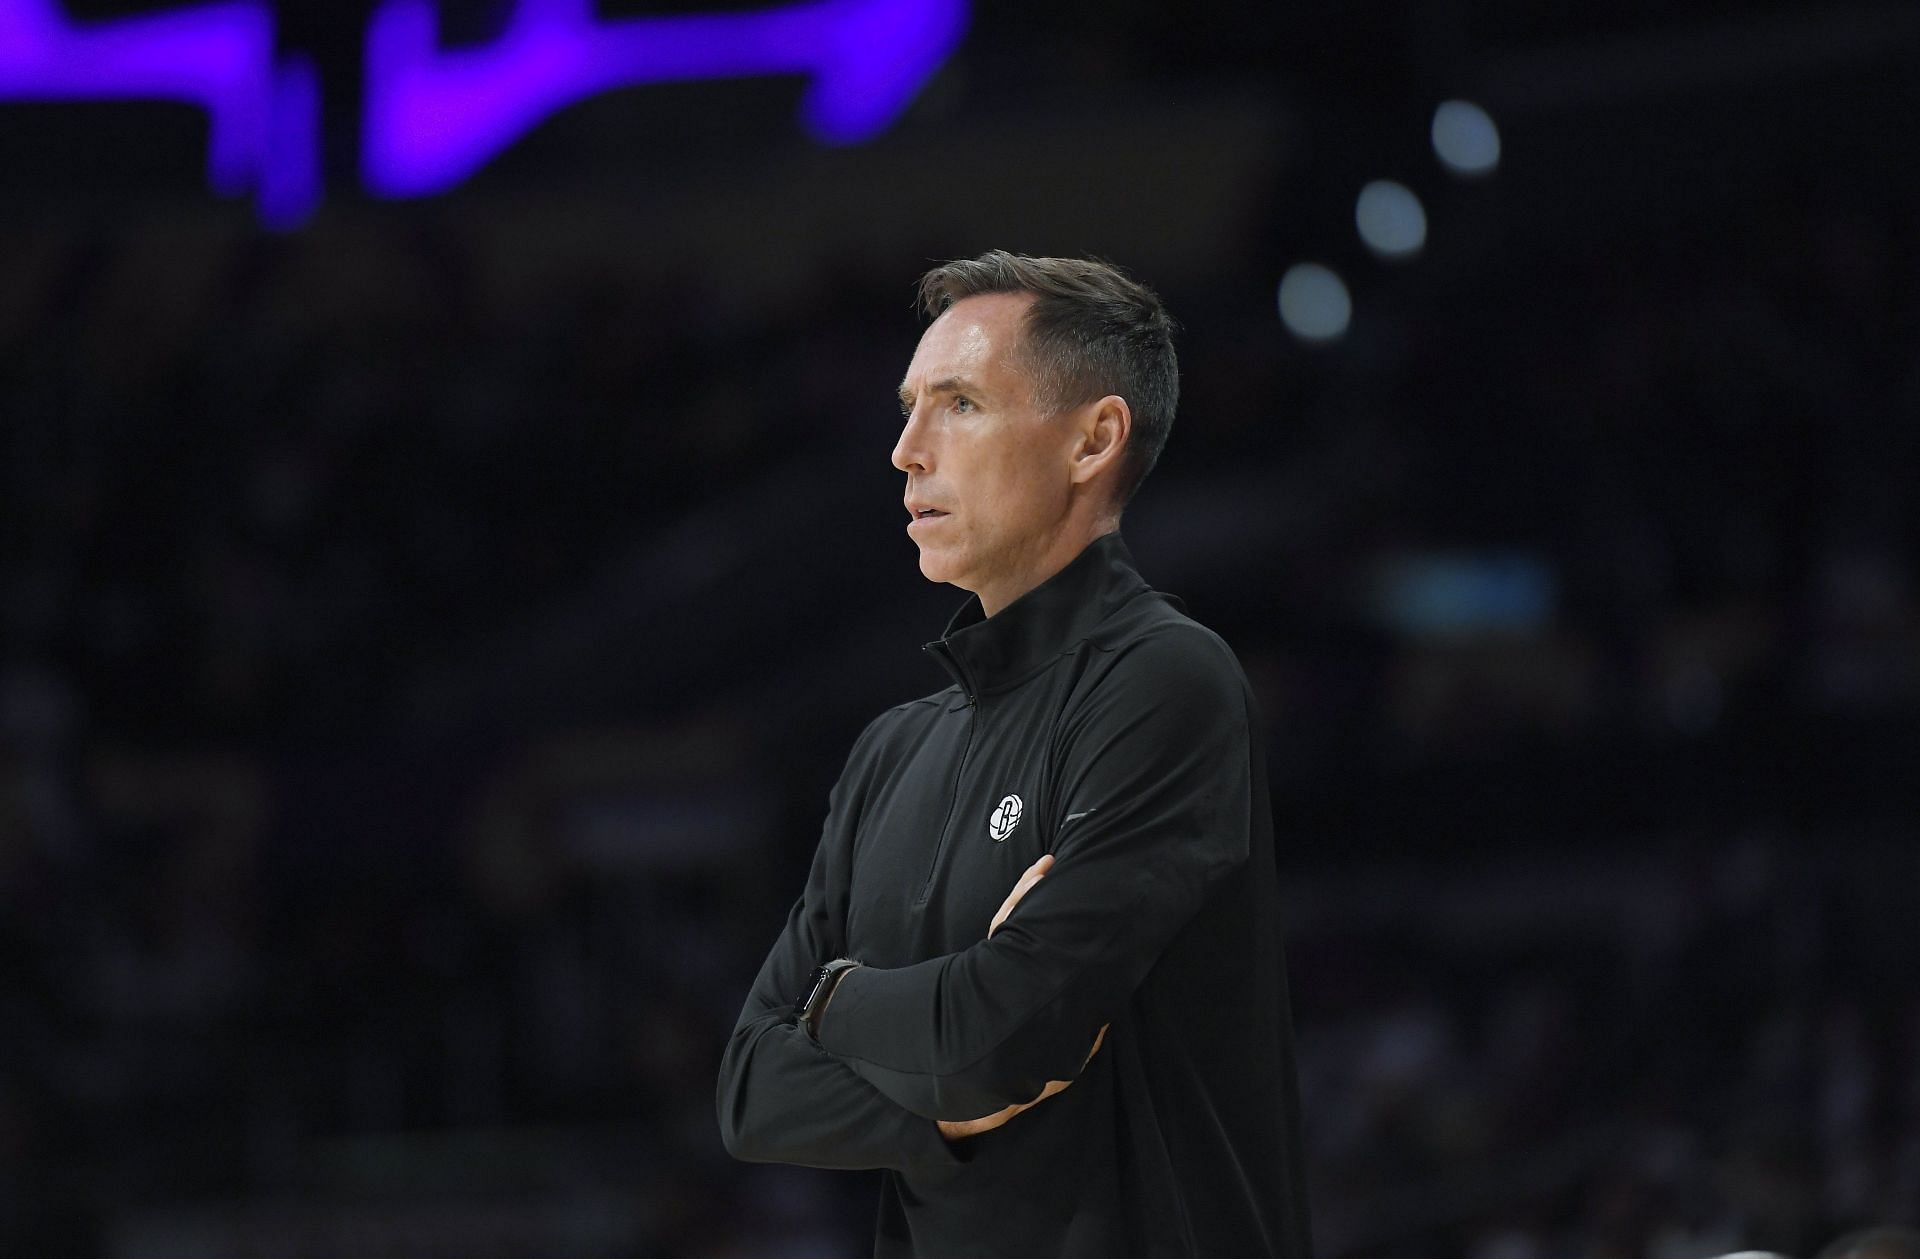 With everything going on with Kyrie Irving, Steve Nash is on the clock